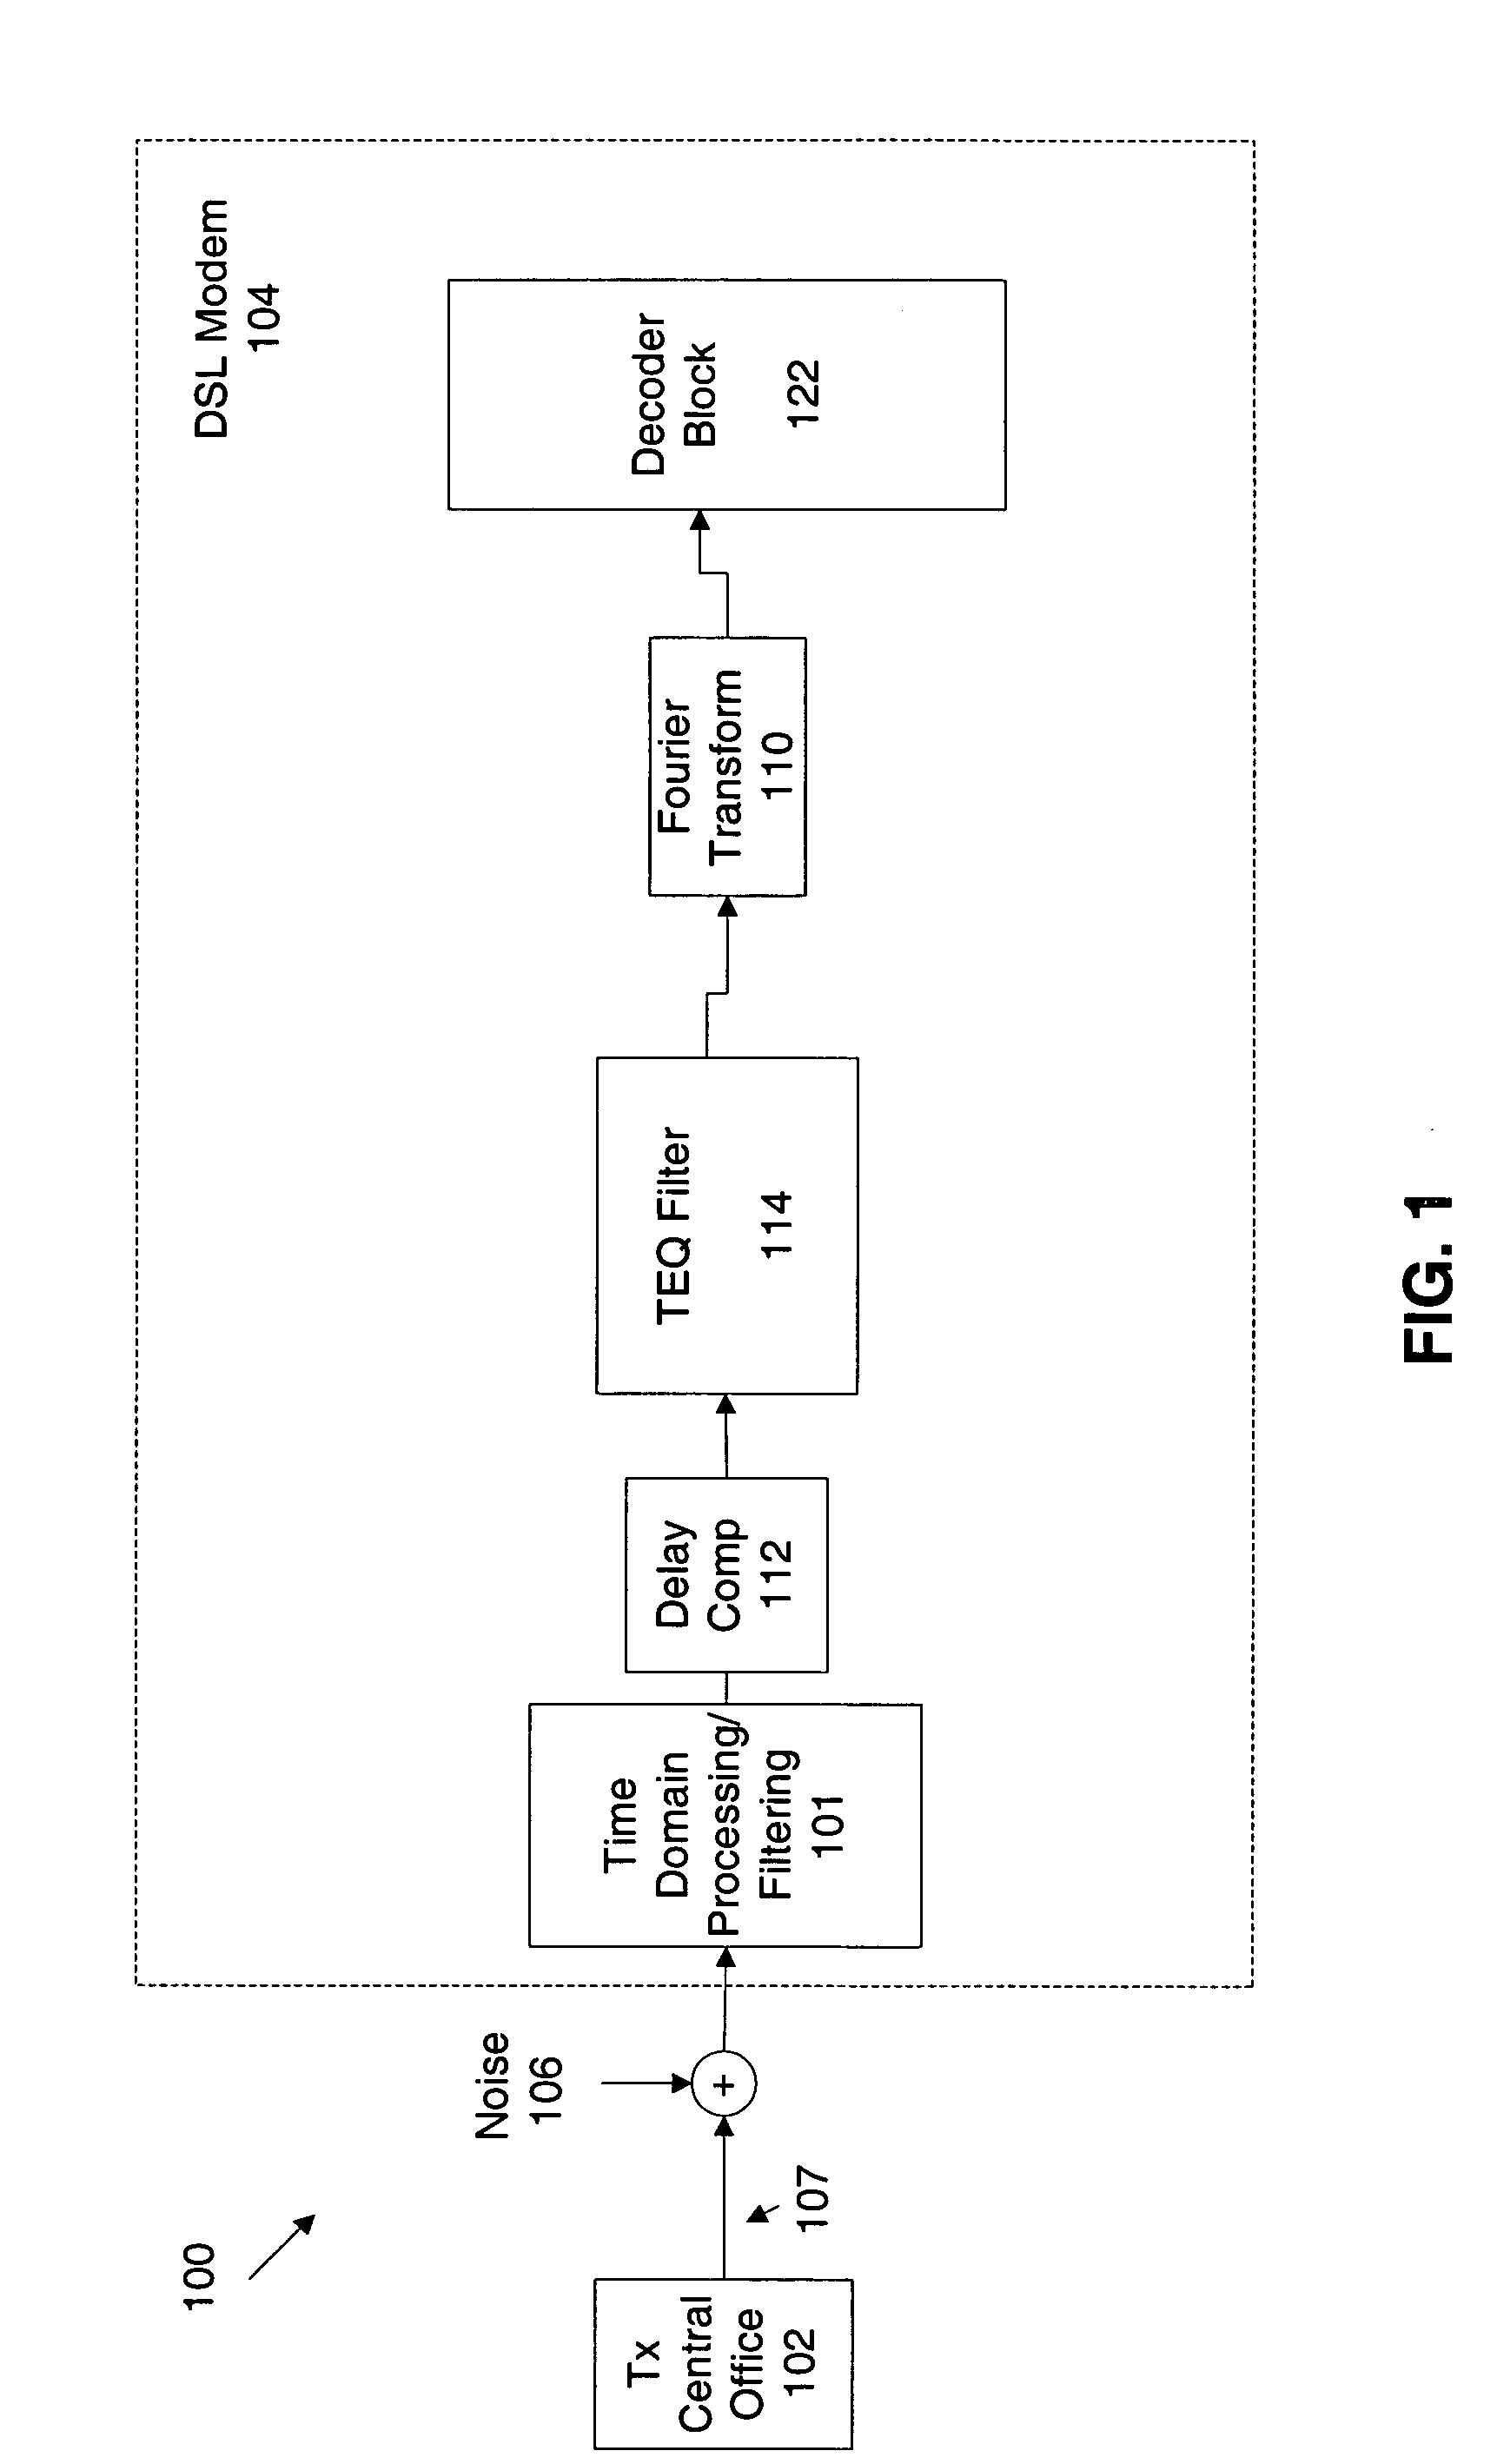 Multicarrier communication using a time domain equalizing filter